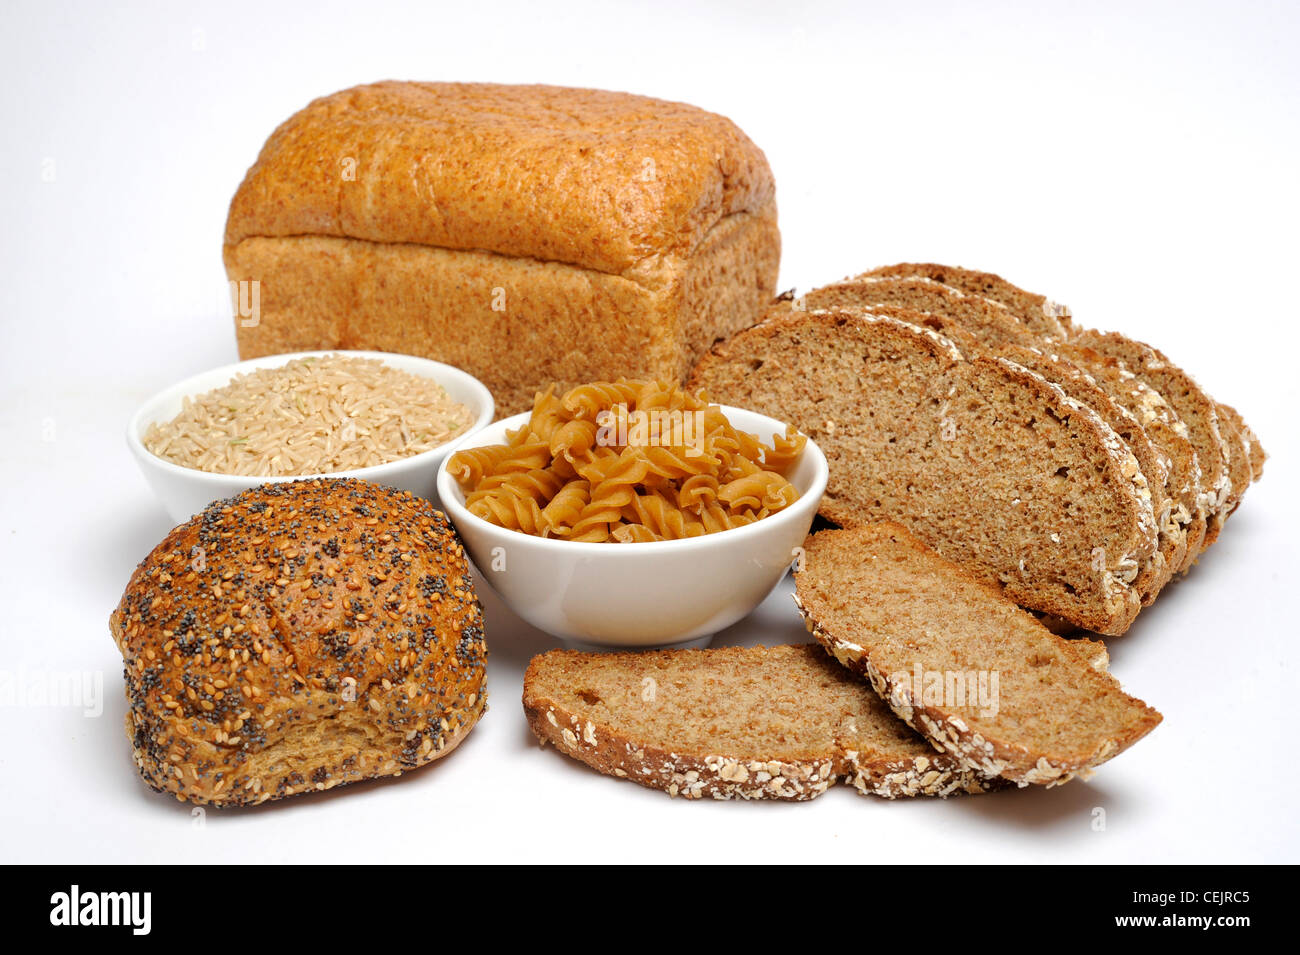 Two bowls filled with long grain rice and dried fusilli pasta surrounded by loaves of bread Stock Photo